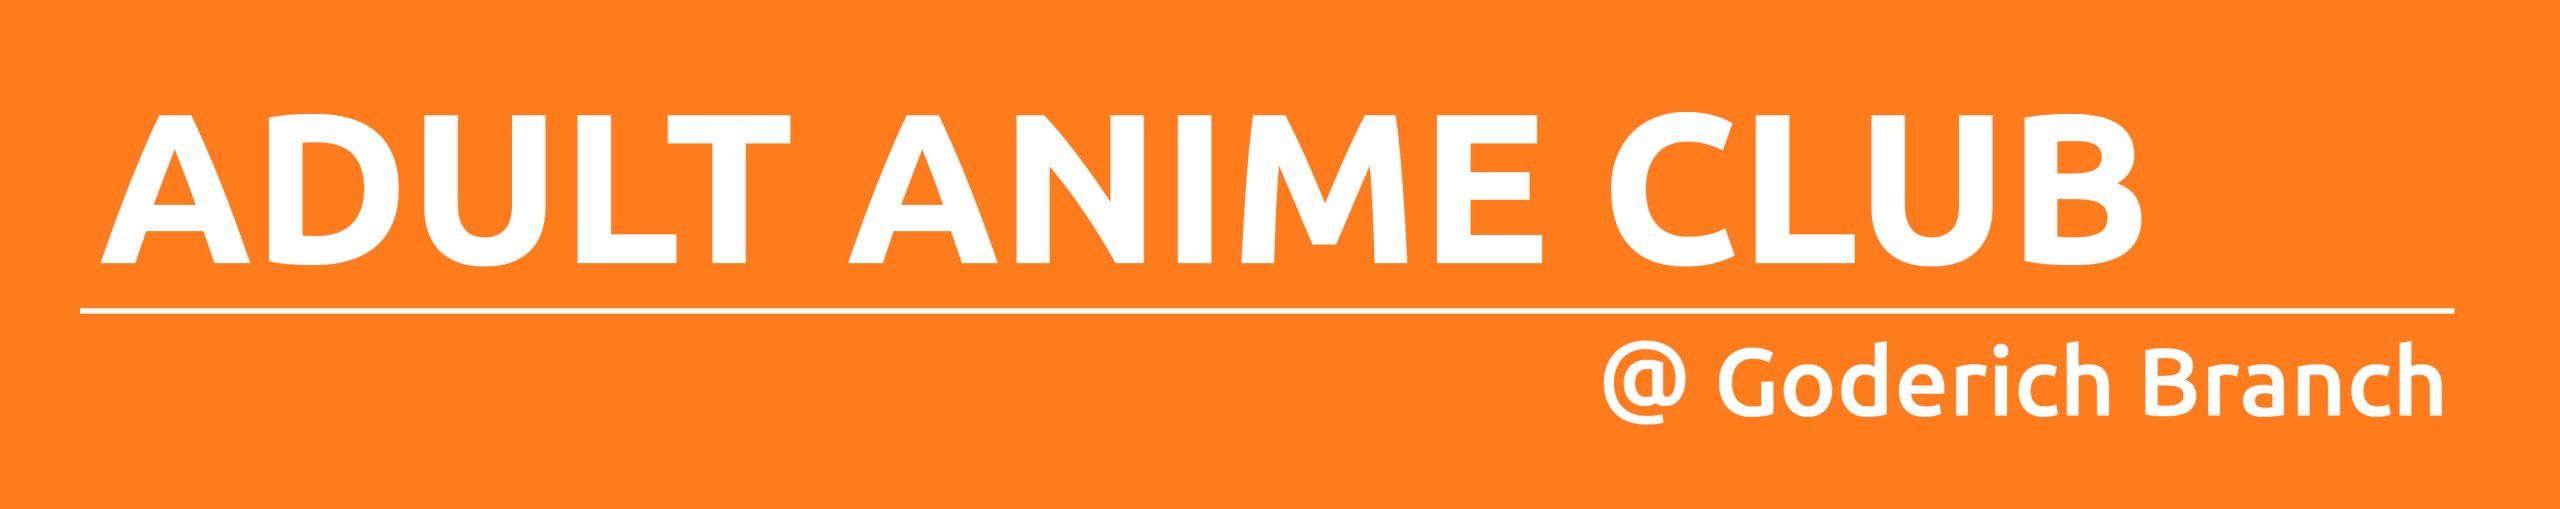 Orange rectangle with text promoting Adult Anime Club at Goderich